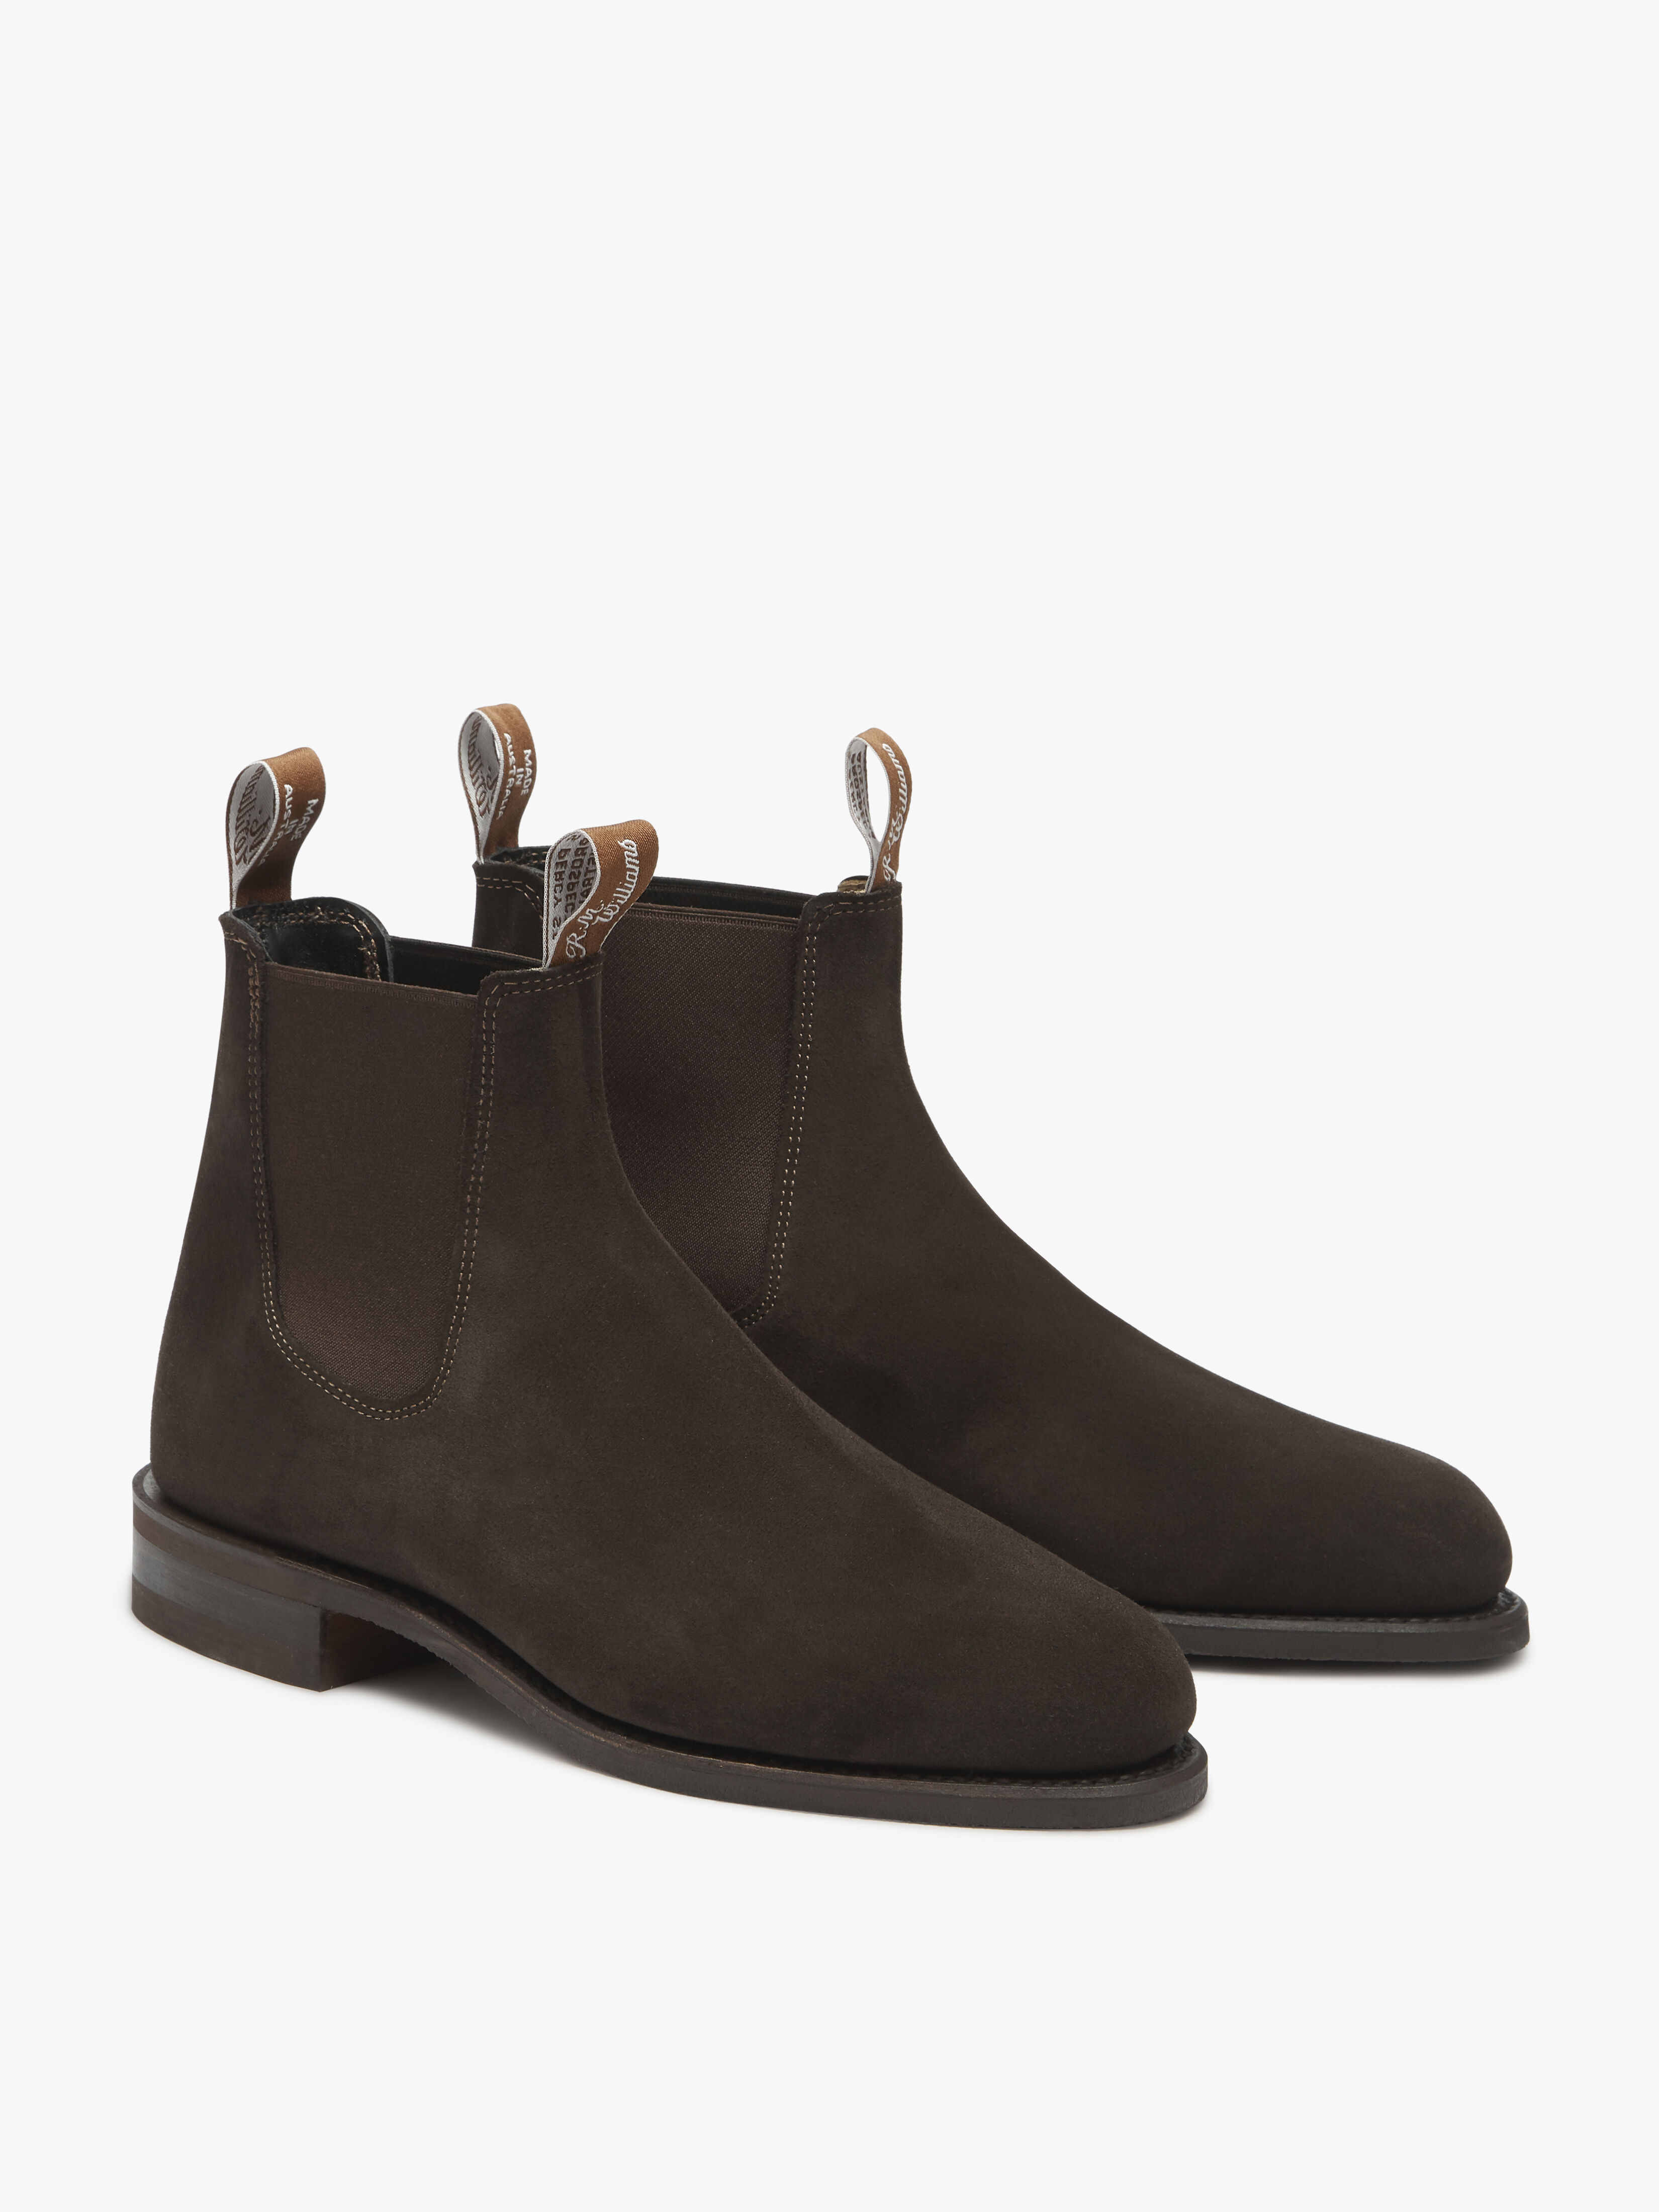 comfort turnout boots